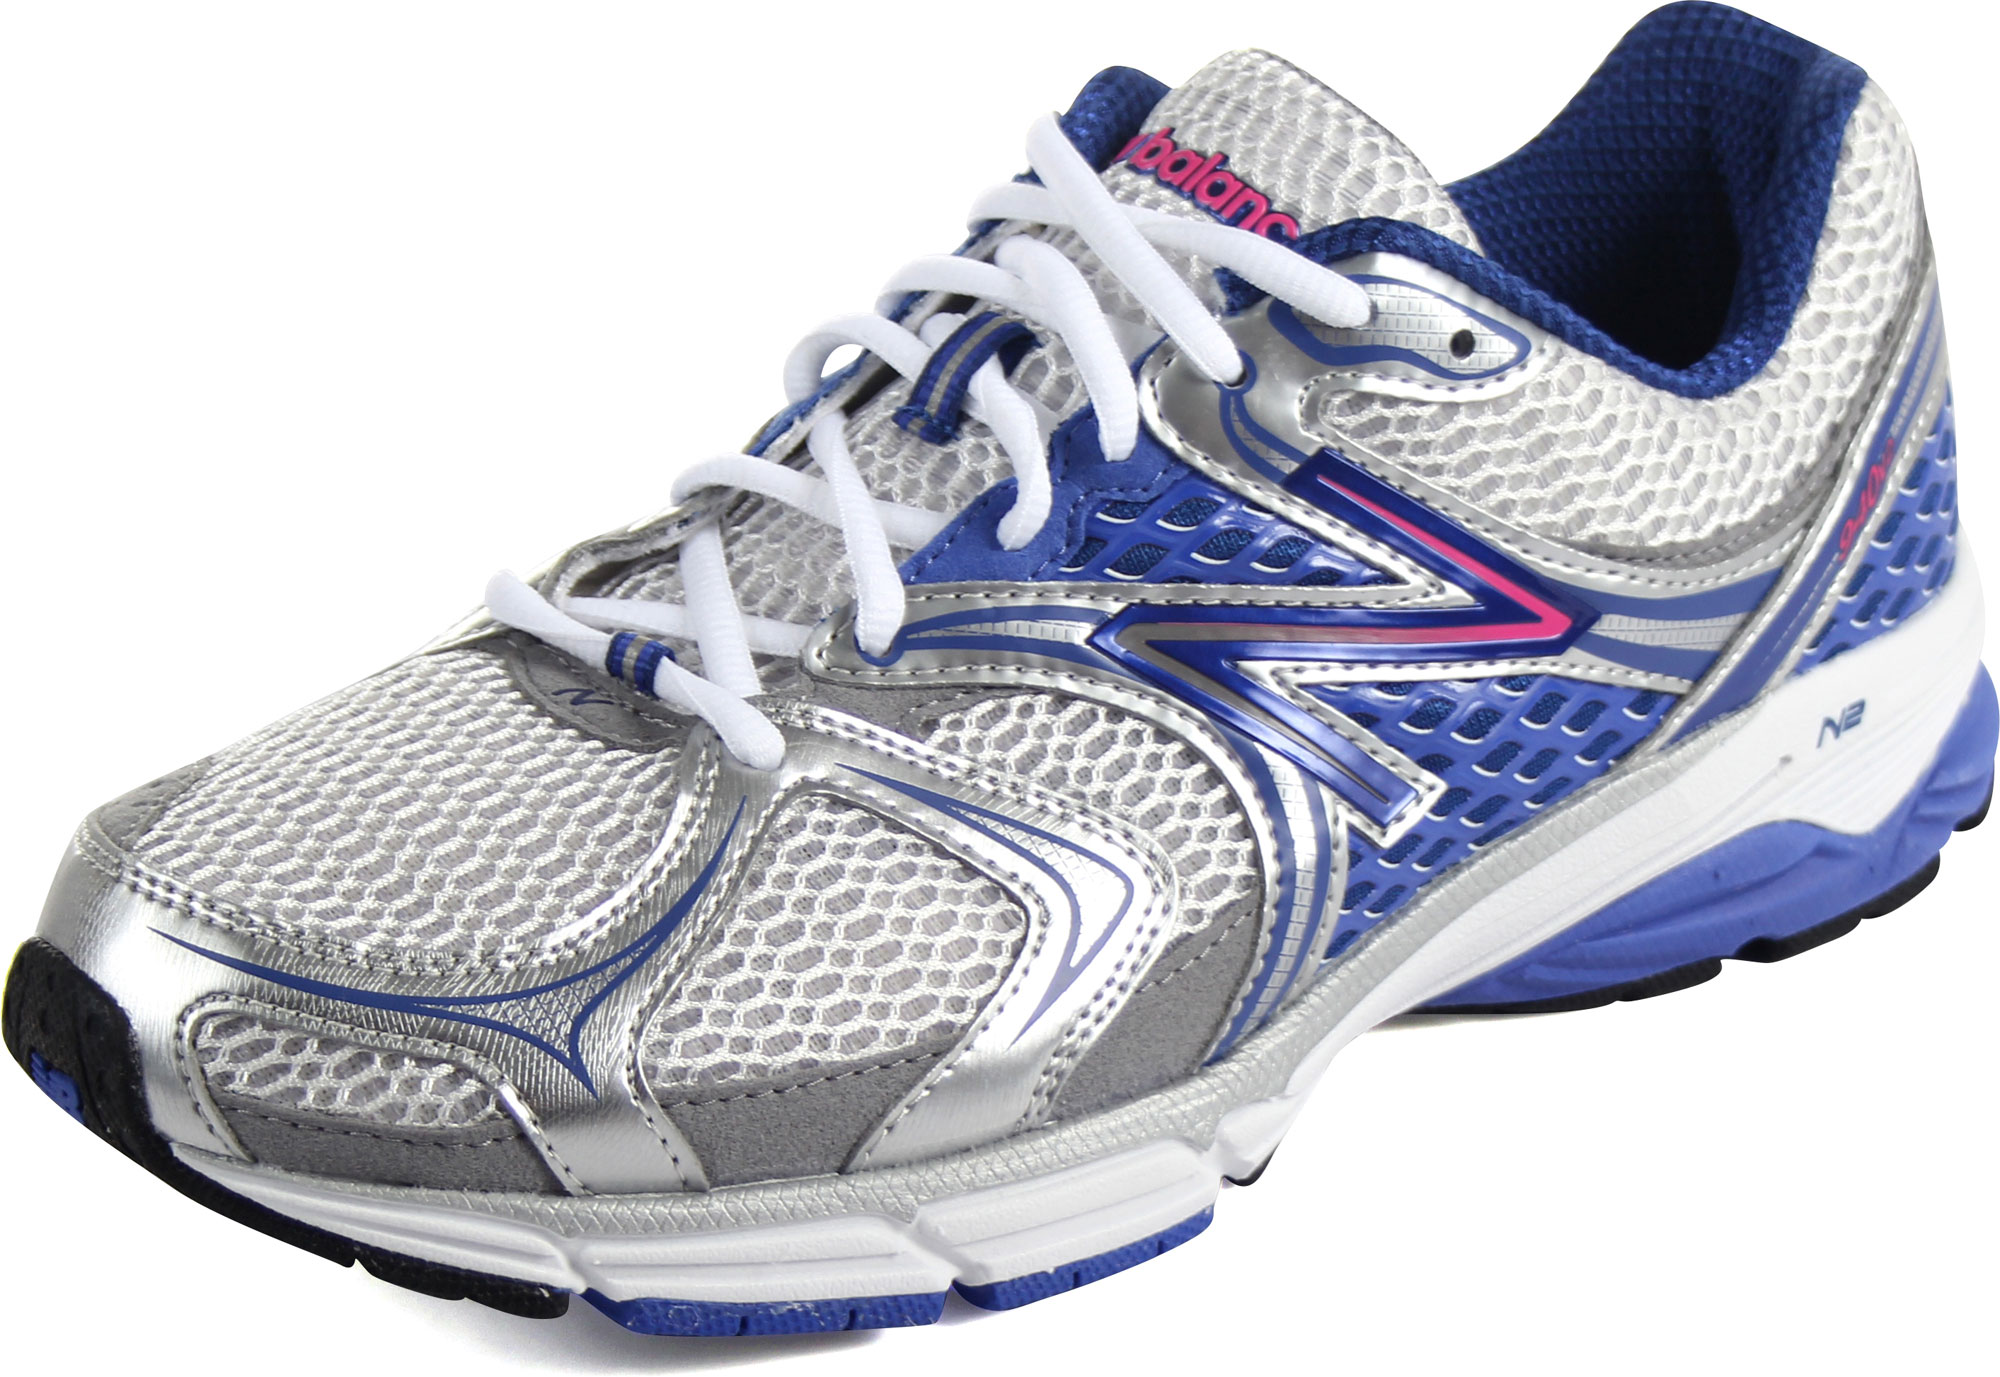 New Balance - Womens 940v2 Stability Running Shoes